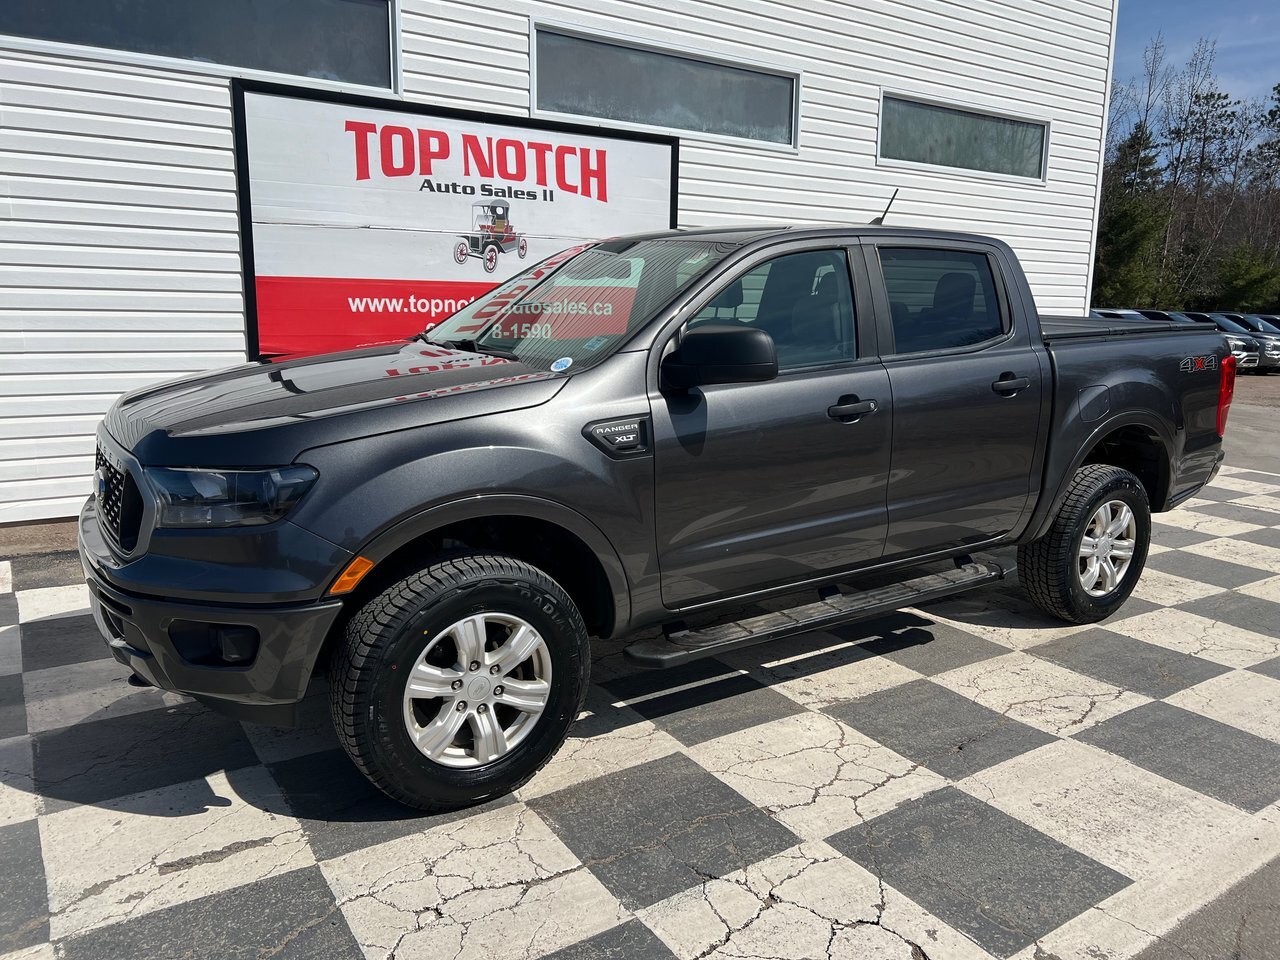 2020 Ford Ranger XLT - 4WD, Supercrew cab, TOW PKG, Cruise, A.C